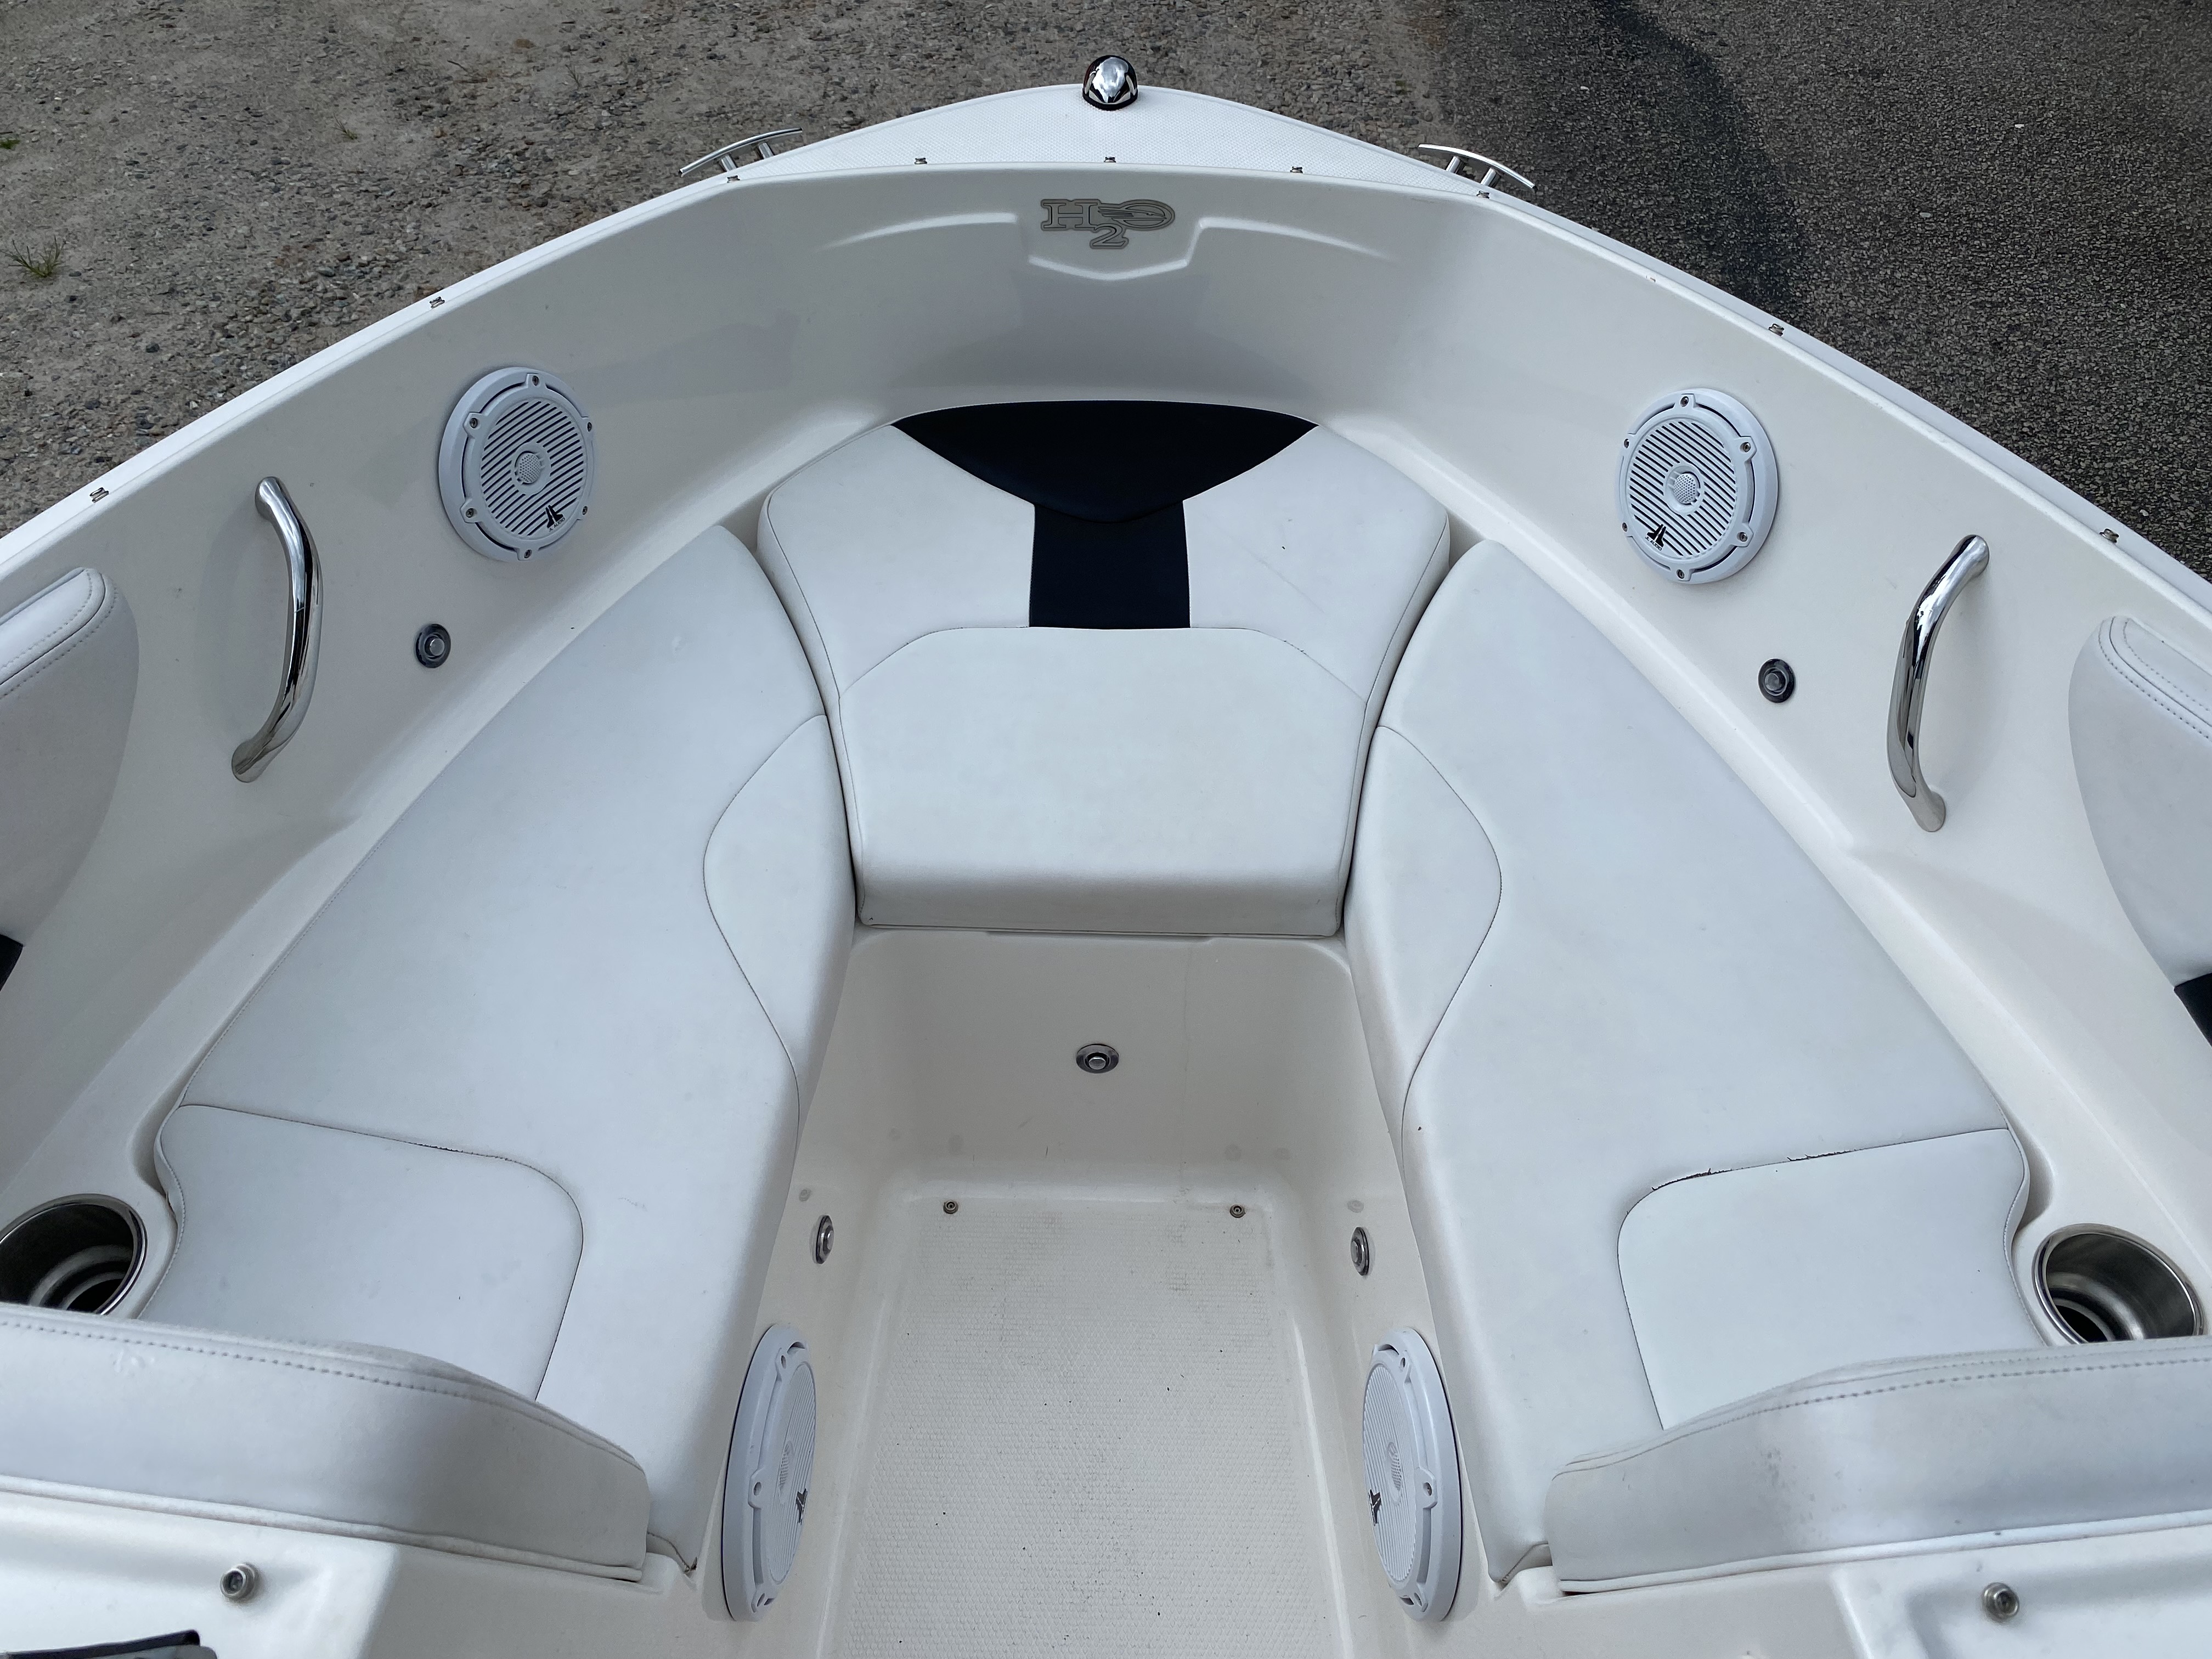 2016 Chaparral boat for sale, model of the boat is 19 H2O Sport & Image # 32 of 32